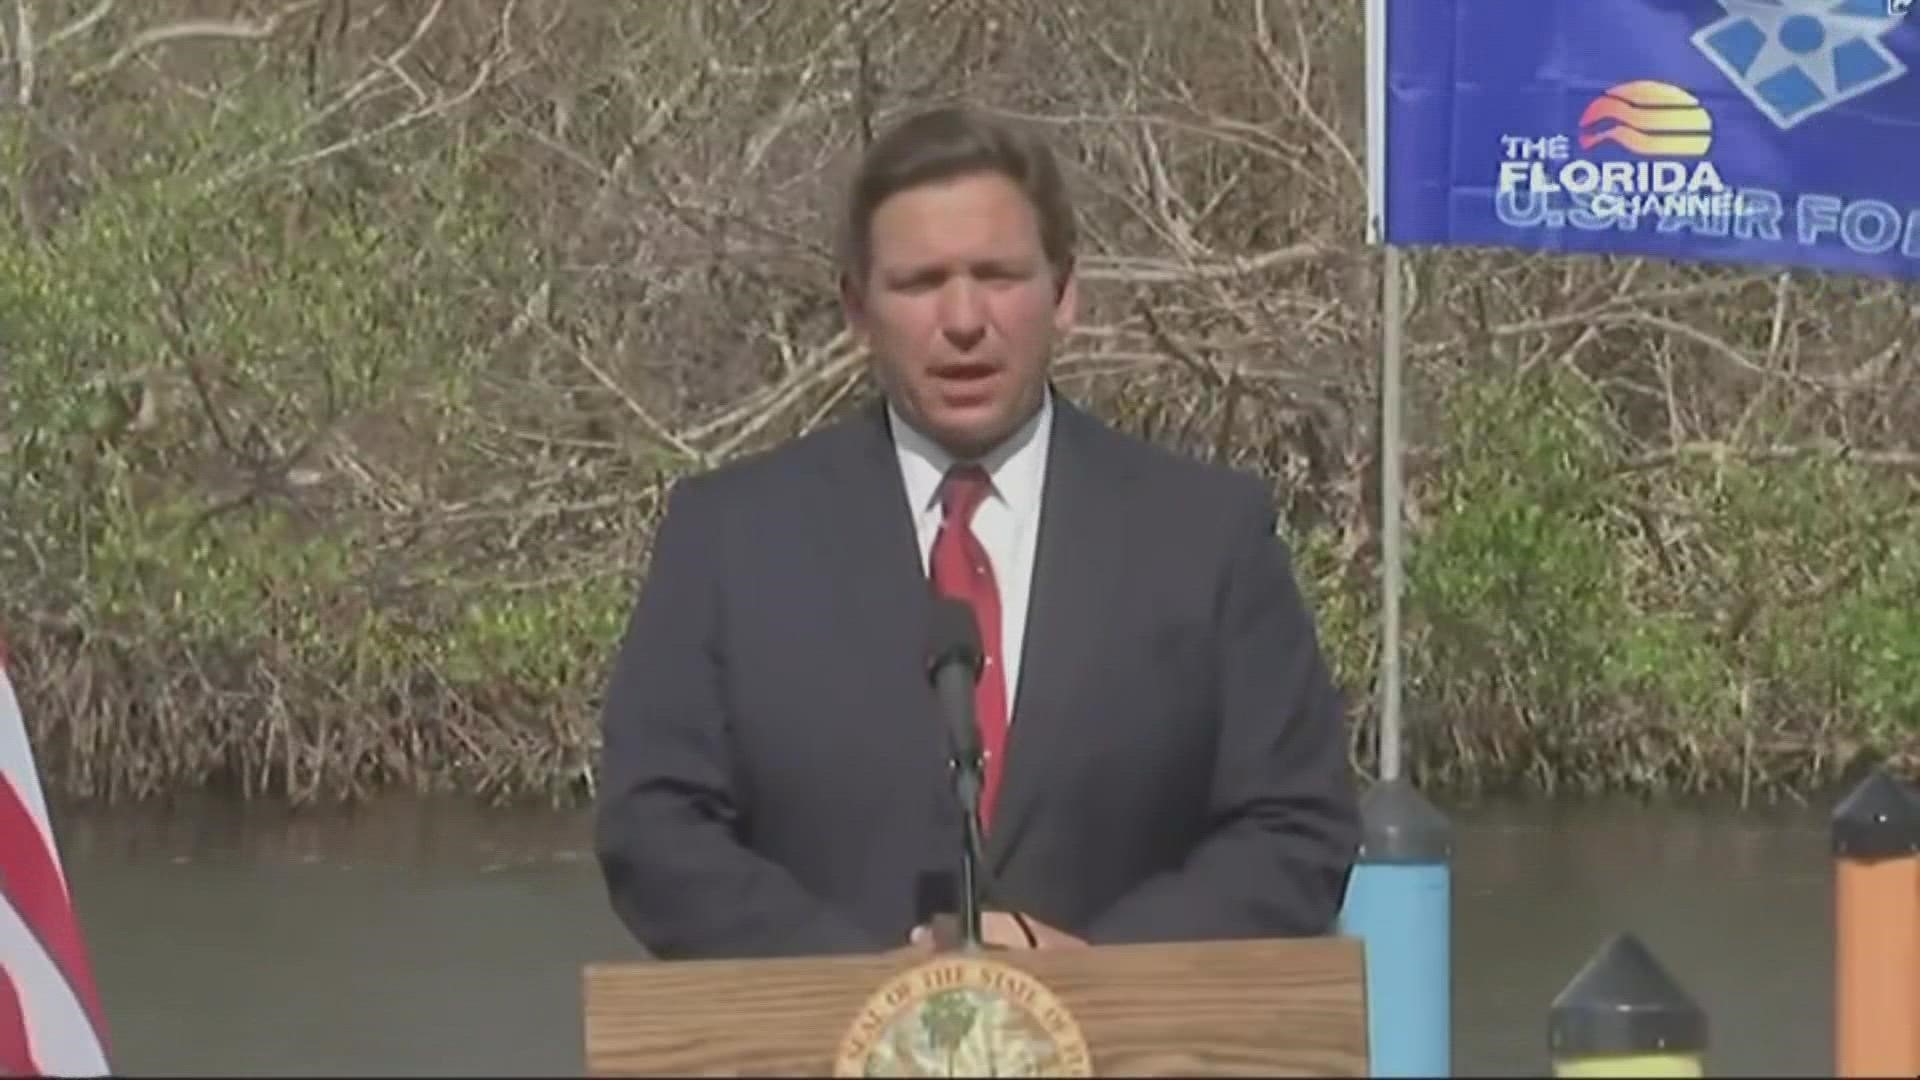 Governor Ron DeSantis says Florida 'was the biggest bright spot in the country' for the GOP during the recent midterm election.